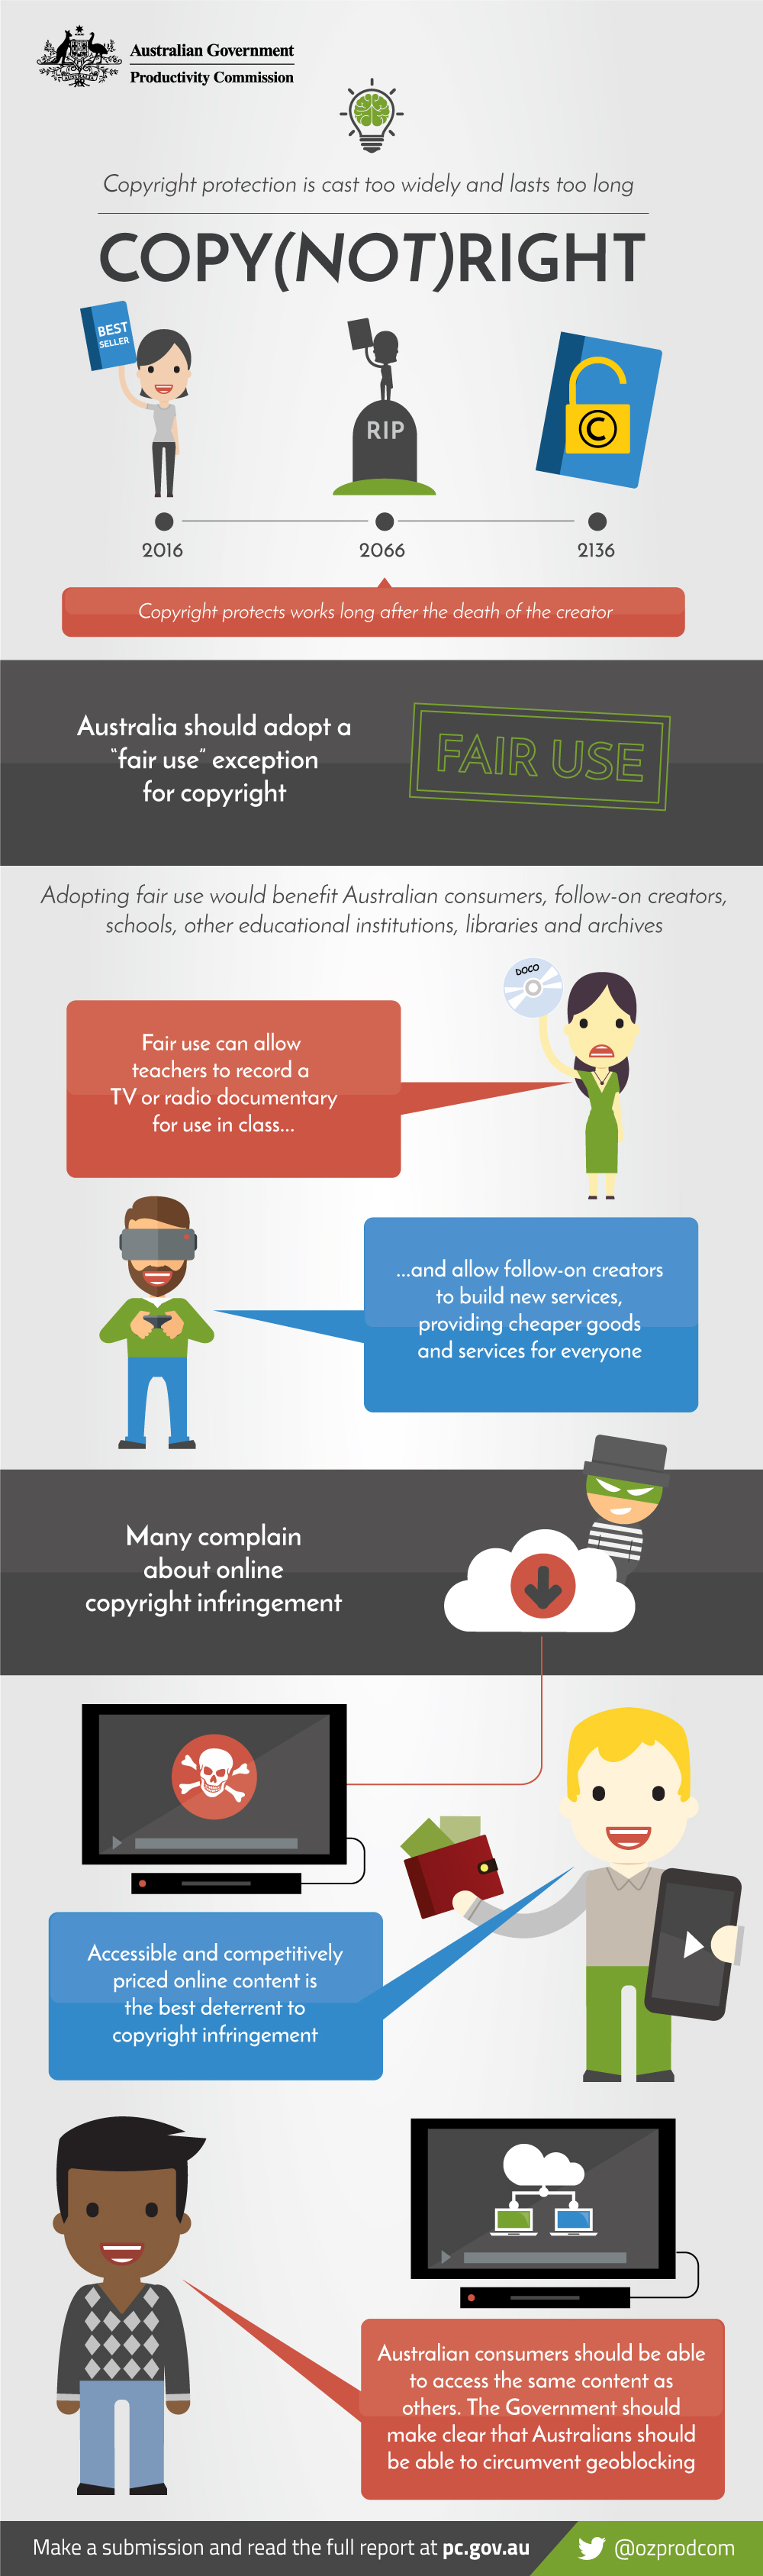 Copy(not)right infographic. Text version follows.